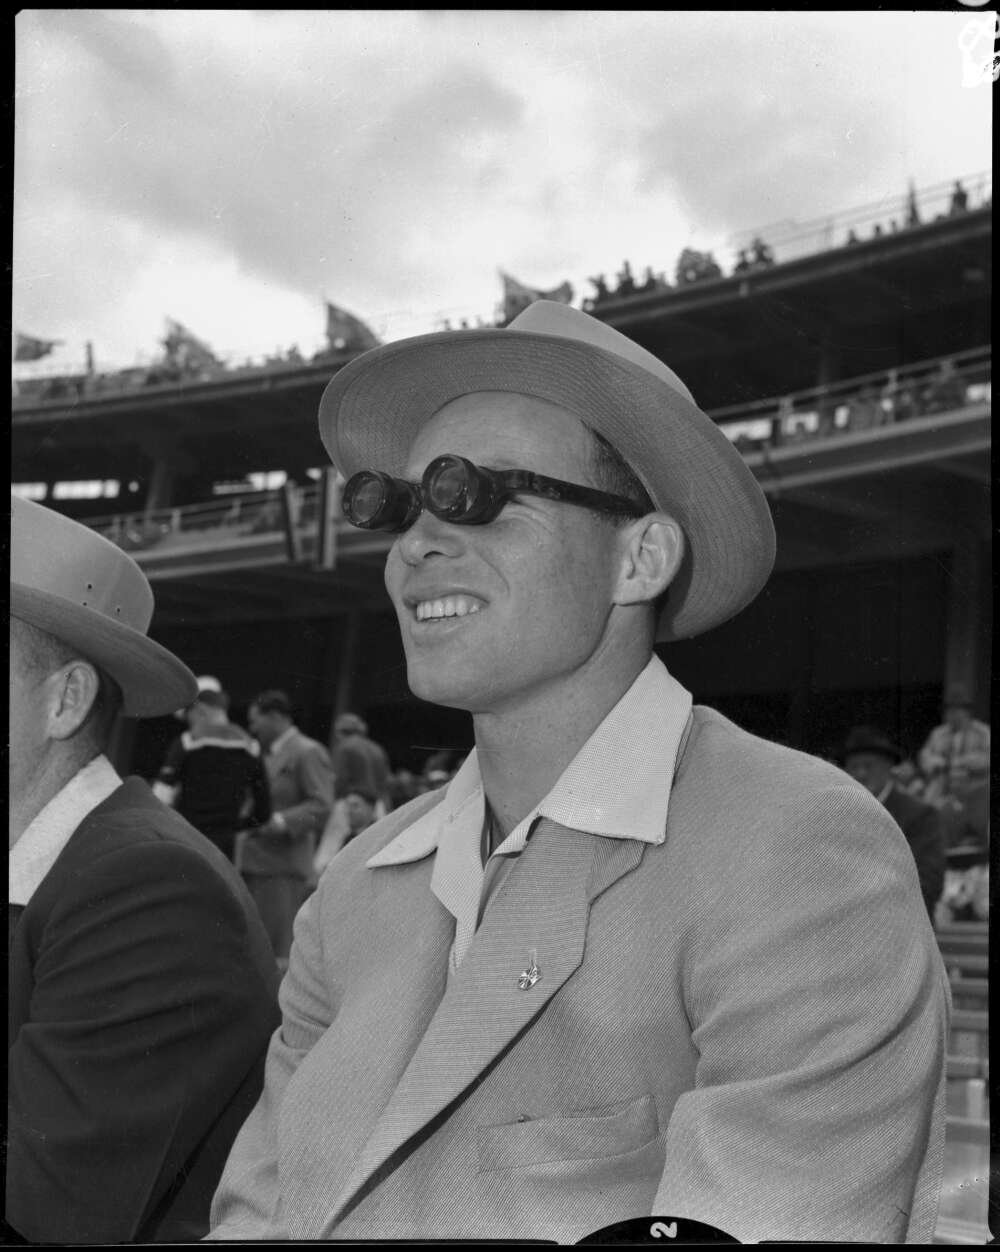 Man sitting in stands of sports stadium in suit and sunhat using binocular glasses